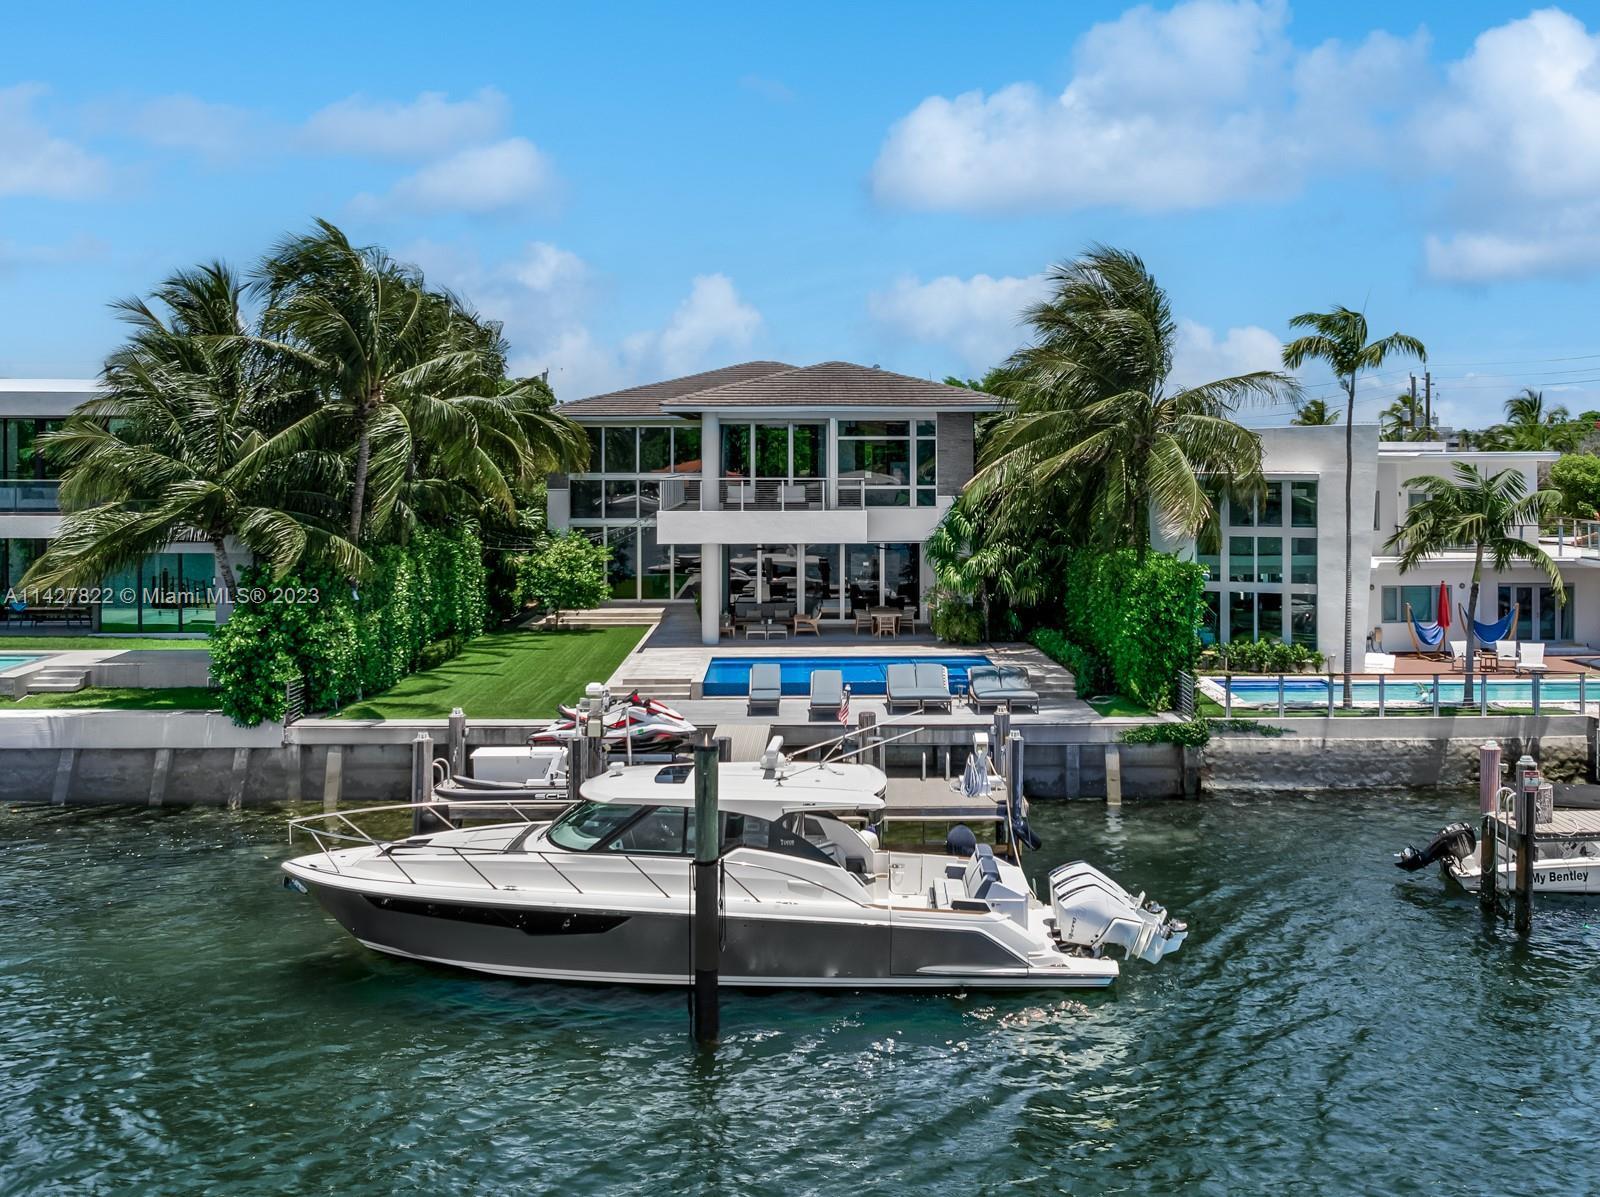 Remarkable turn-key waterfront residence located in the gated community of Biscayne Point. This exqu